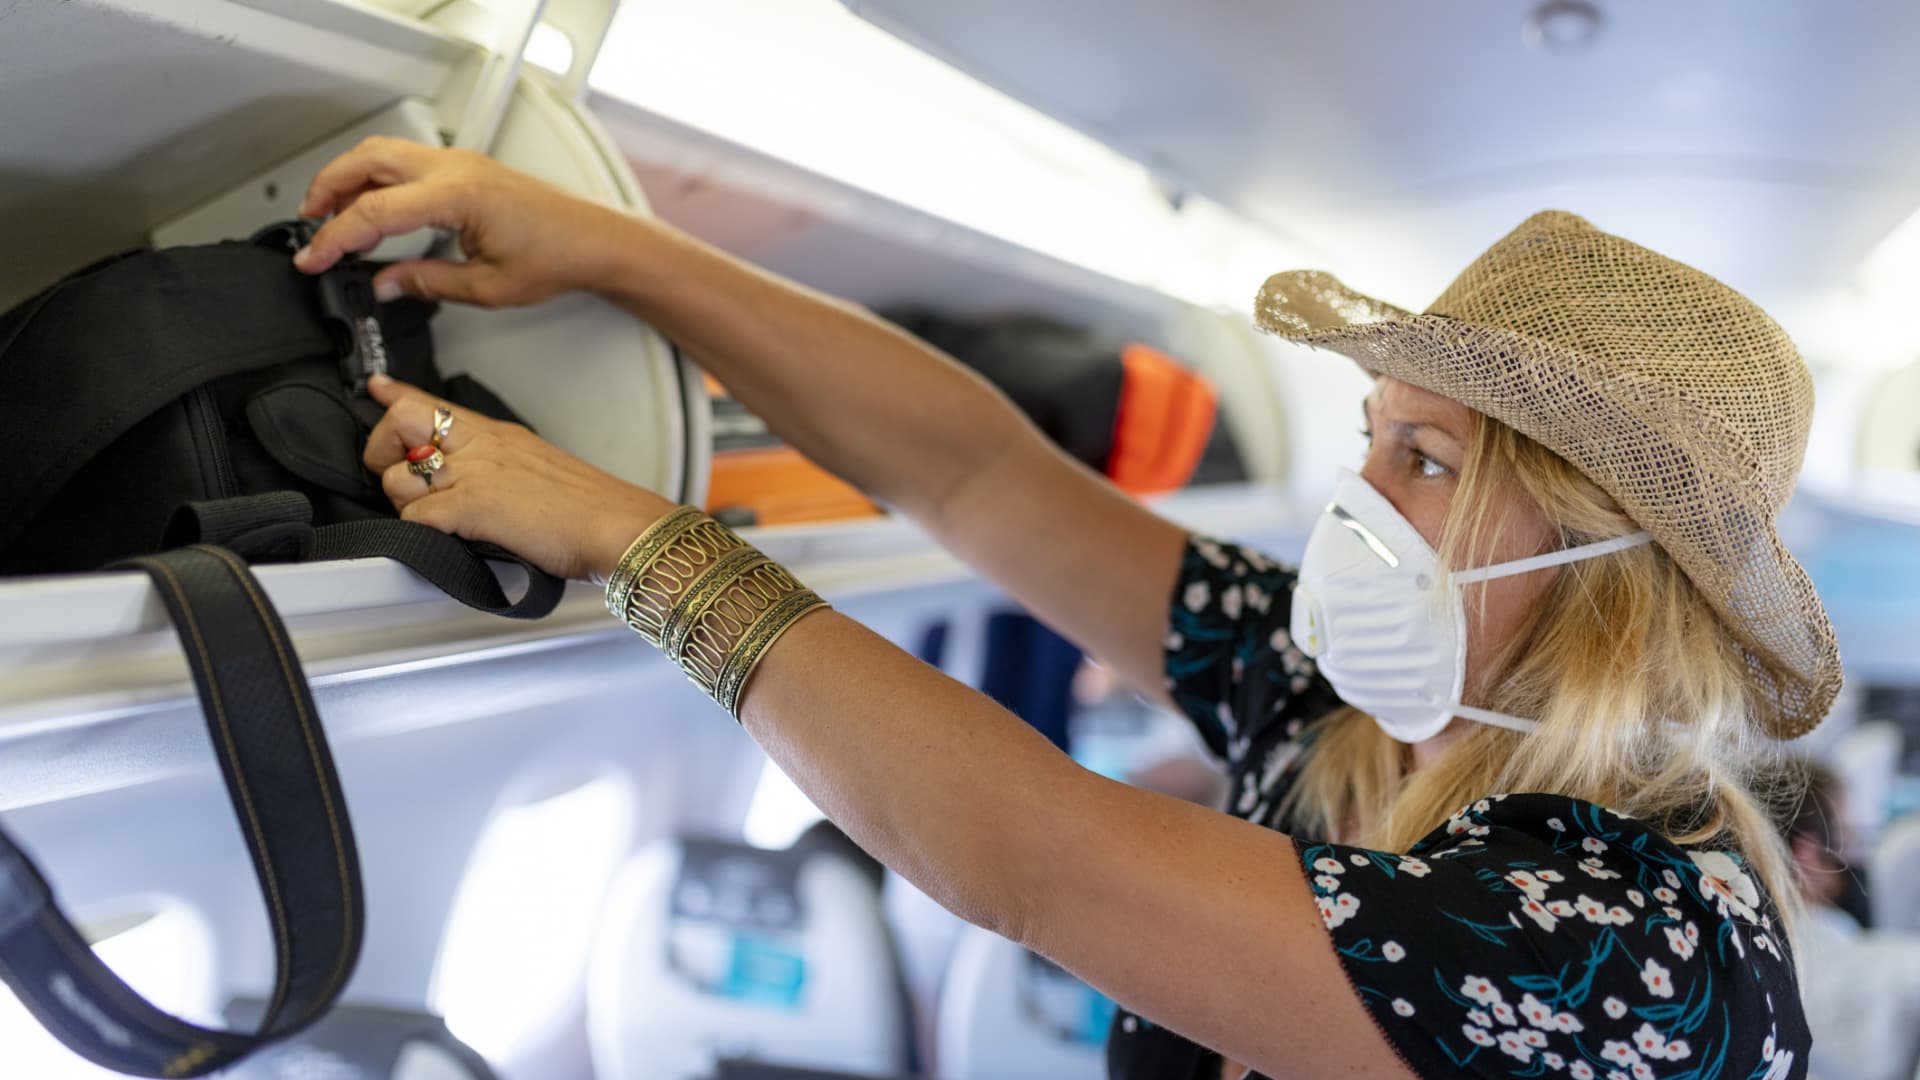 CDC asks Justice Department to appeal ruling that lifted travel mask mandate